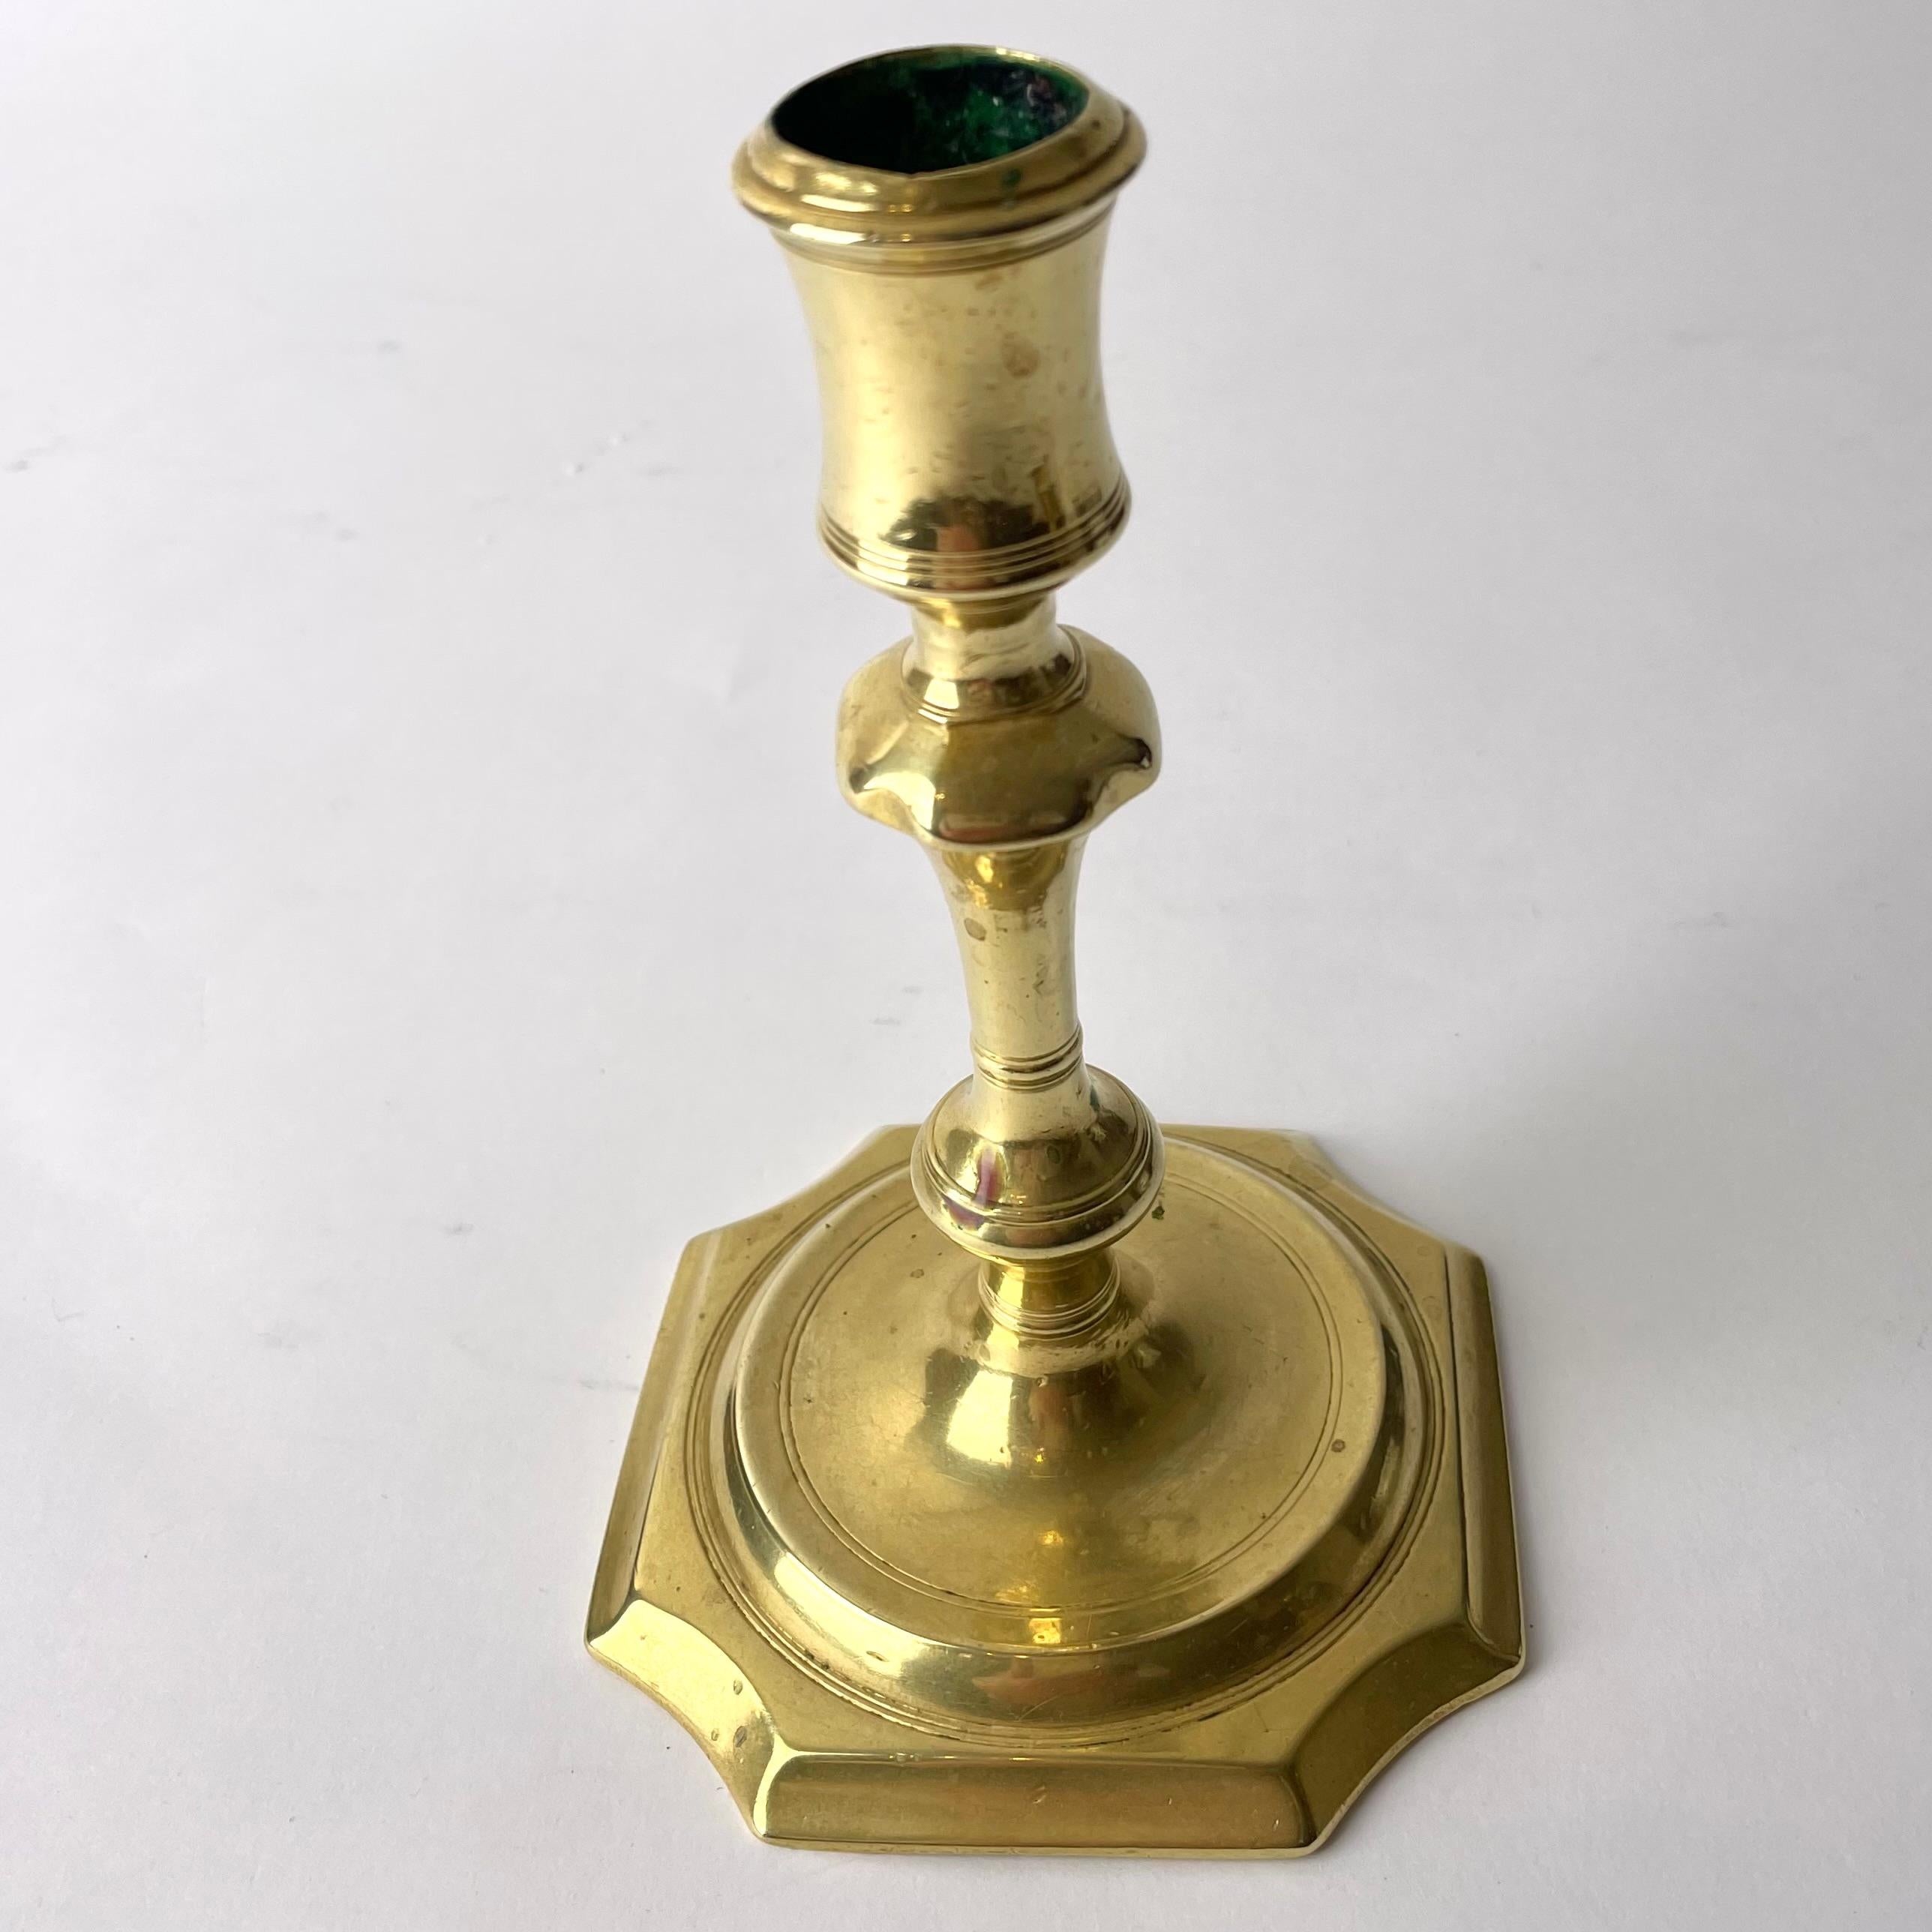 A cool Brass Candlestick in Swedish Baroque from early 18th Century. Beautiful wear and patina

Wear consistent with age and use 